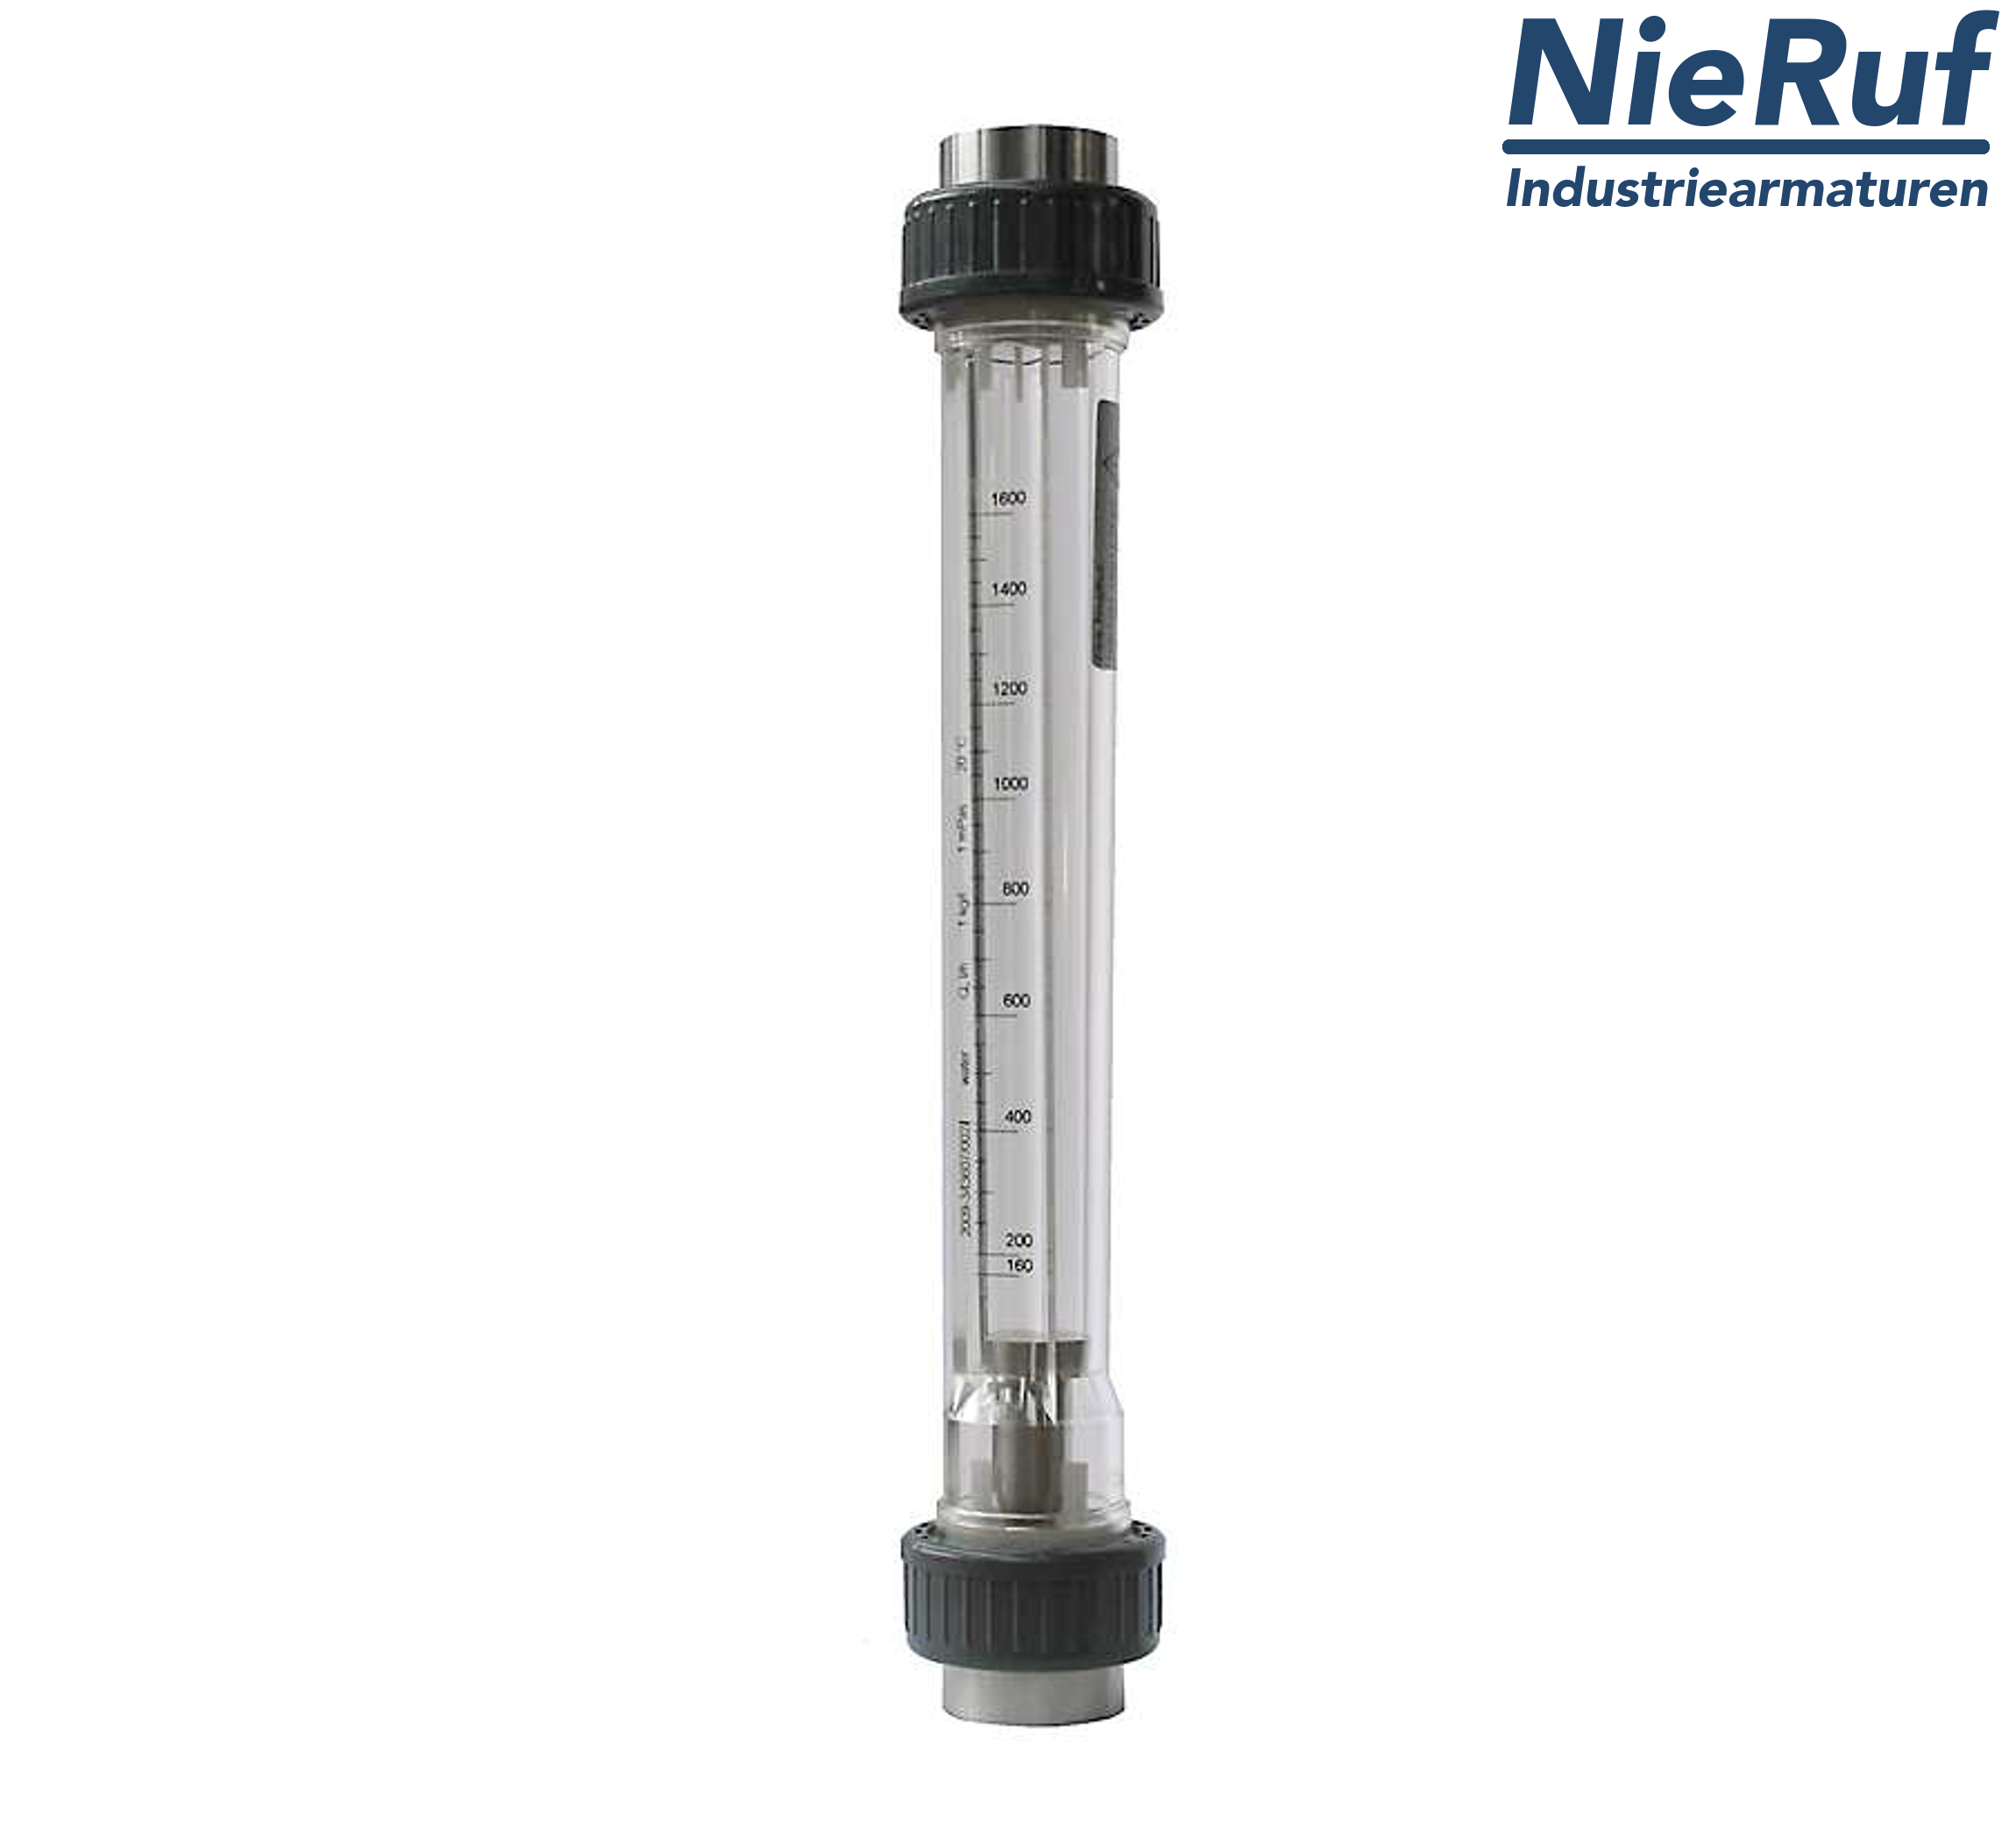 Variable area flowmeter 3/4" inch 250.0 - 2500 l/h water FKM